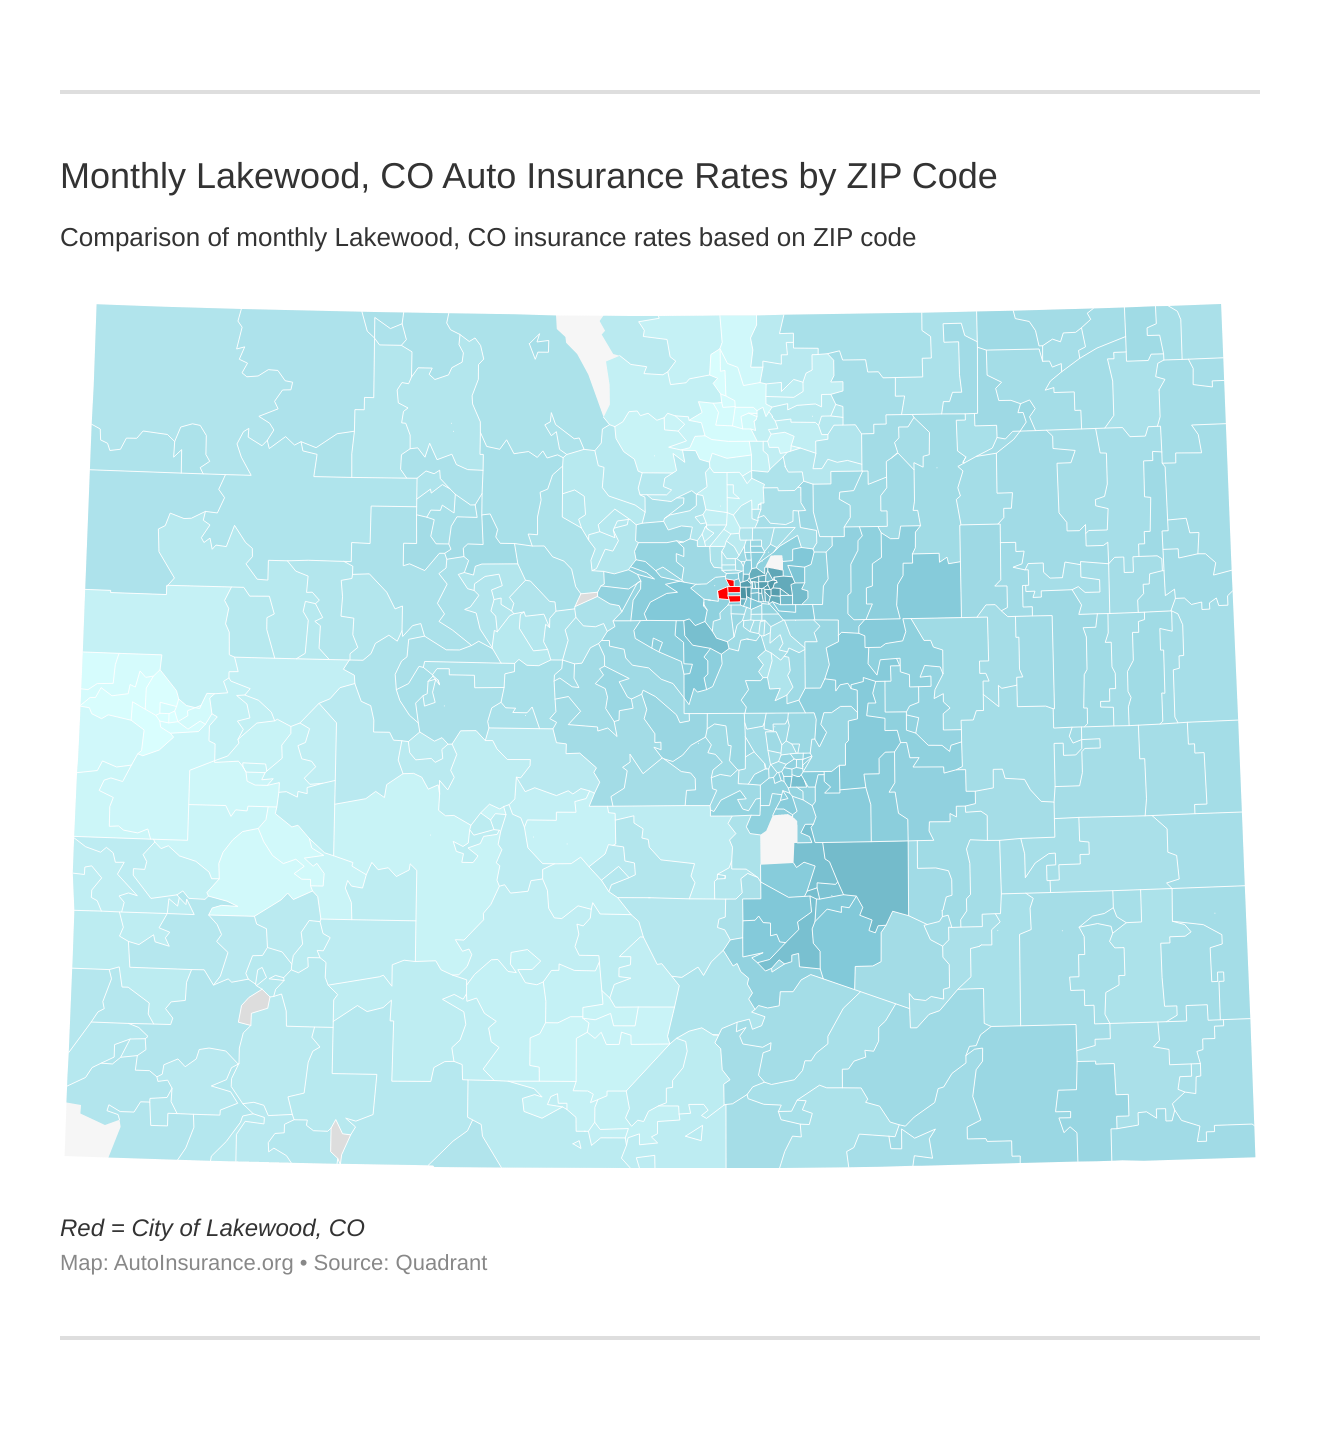 Monthly Lakewood, CO Auto Insurance Rates by ZIP Code